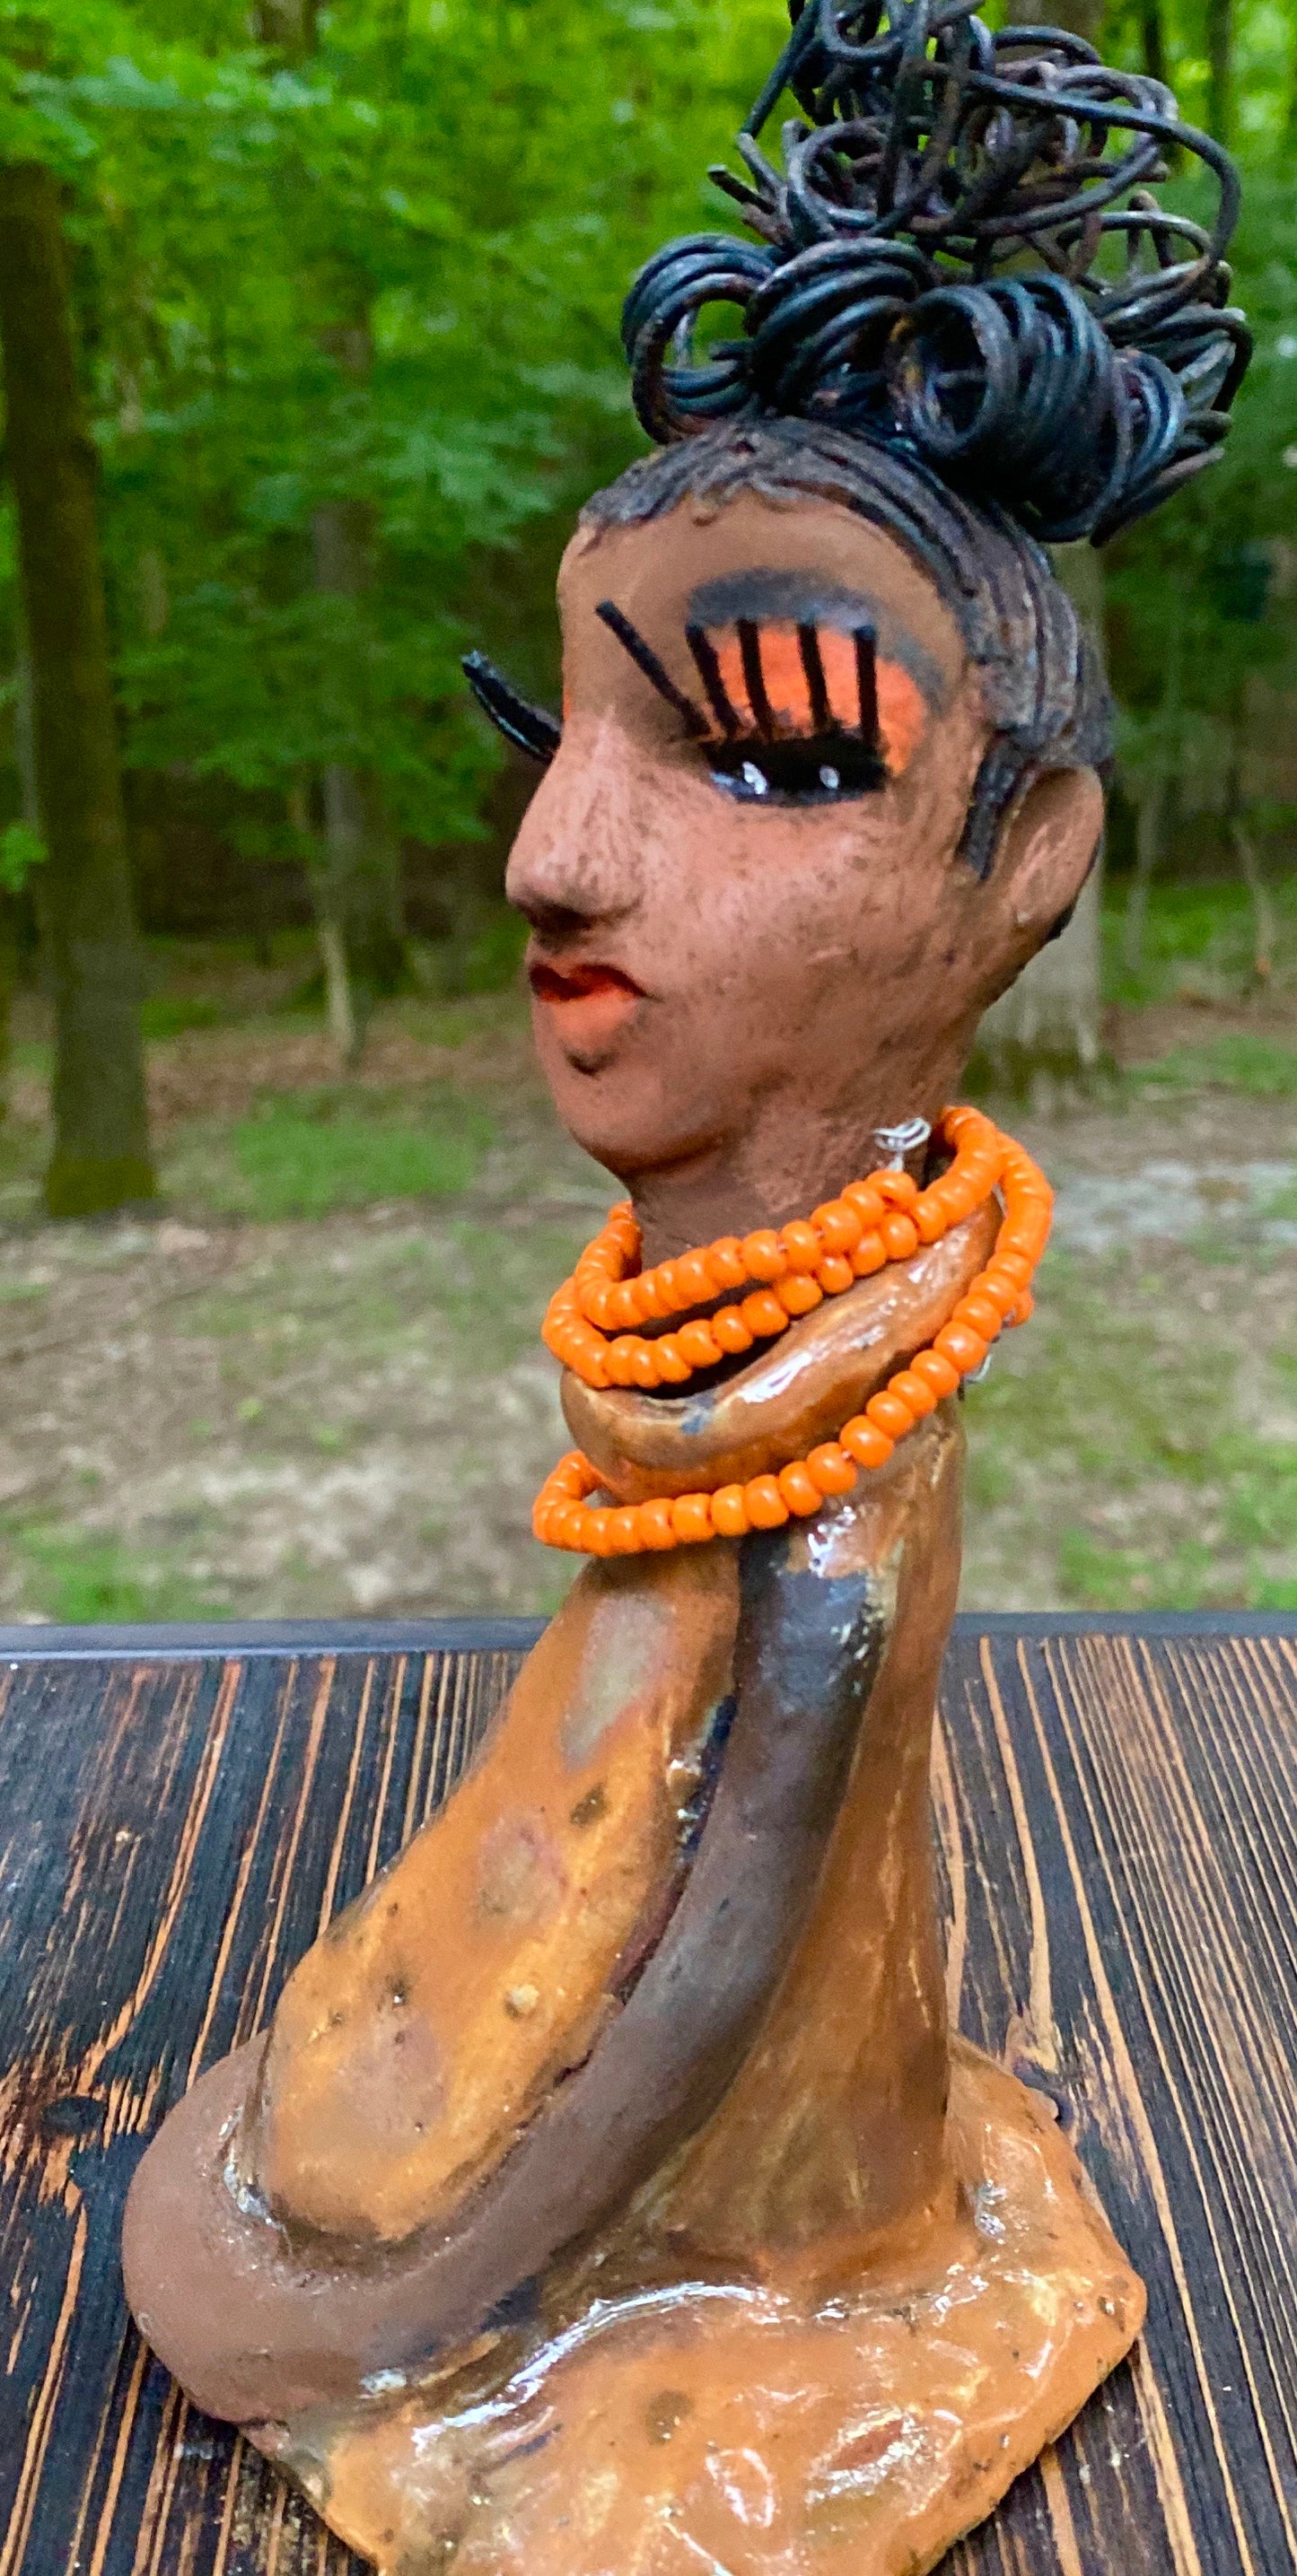 Meet Abimbola ! Abimbola stands 7' x 4"x 2" and weighs 1.3 lb. She has bright eyes and a nice honey brown complexion Abimbola  has over 5 feet of 16 gauge wire hair wrapped in a bun. Her long trademark arms rest at her side. Abimbola dress is a loving glossy orange mix with copper flashes. Abimbola is waiting for you to invite her into your home! 